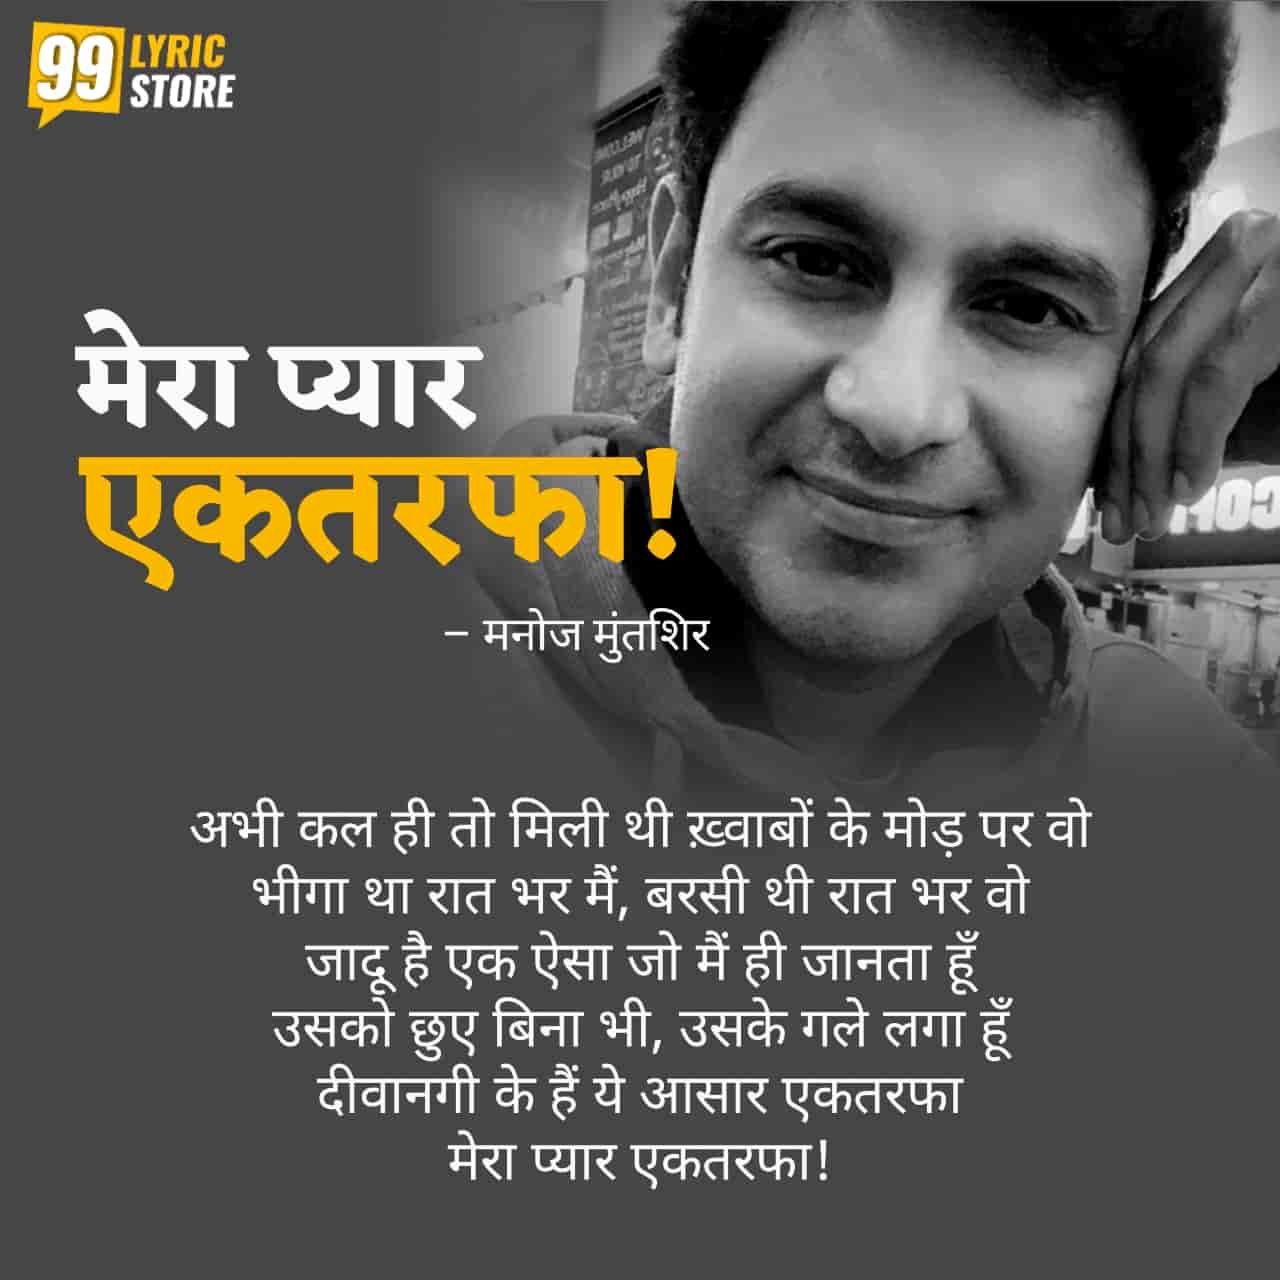 Renowned lyricist Manoj Muntashir recited two Nazm(Poetry),  called 'Mera Pyaar Ektarfa' which is very loving and beautiful. This Nazm(Poetry) depicts